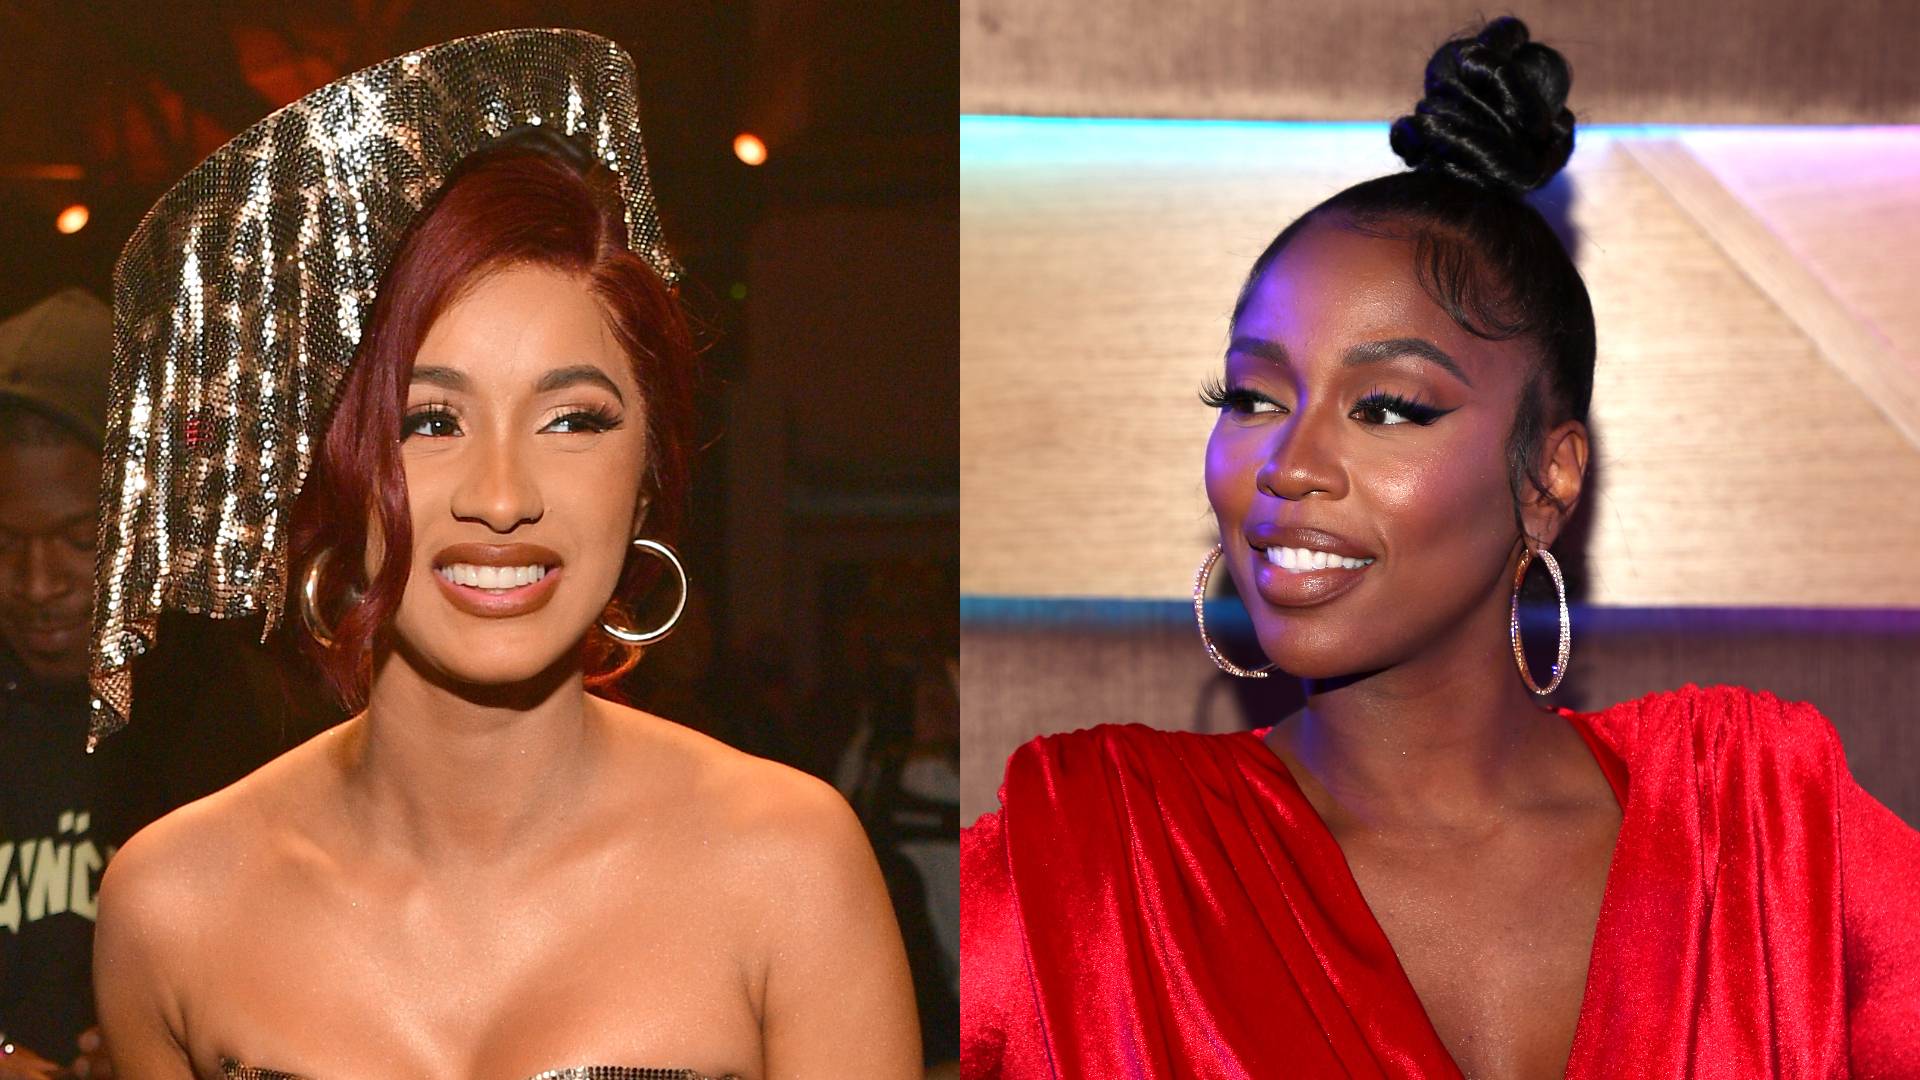 WATCH: Cardi B Teaches Kash Doll How To Change A Diaper With Super Long Nails! 